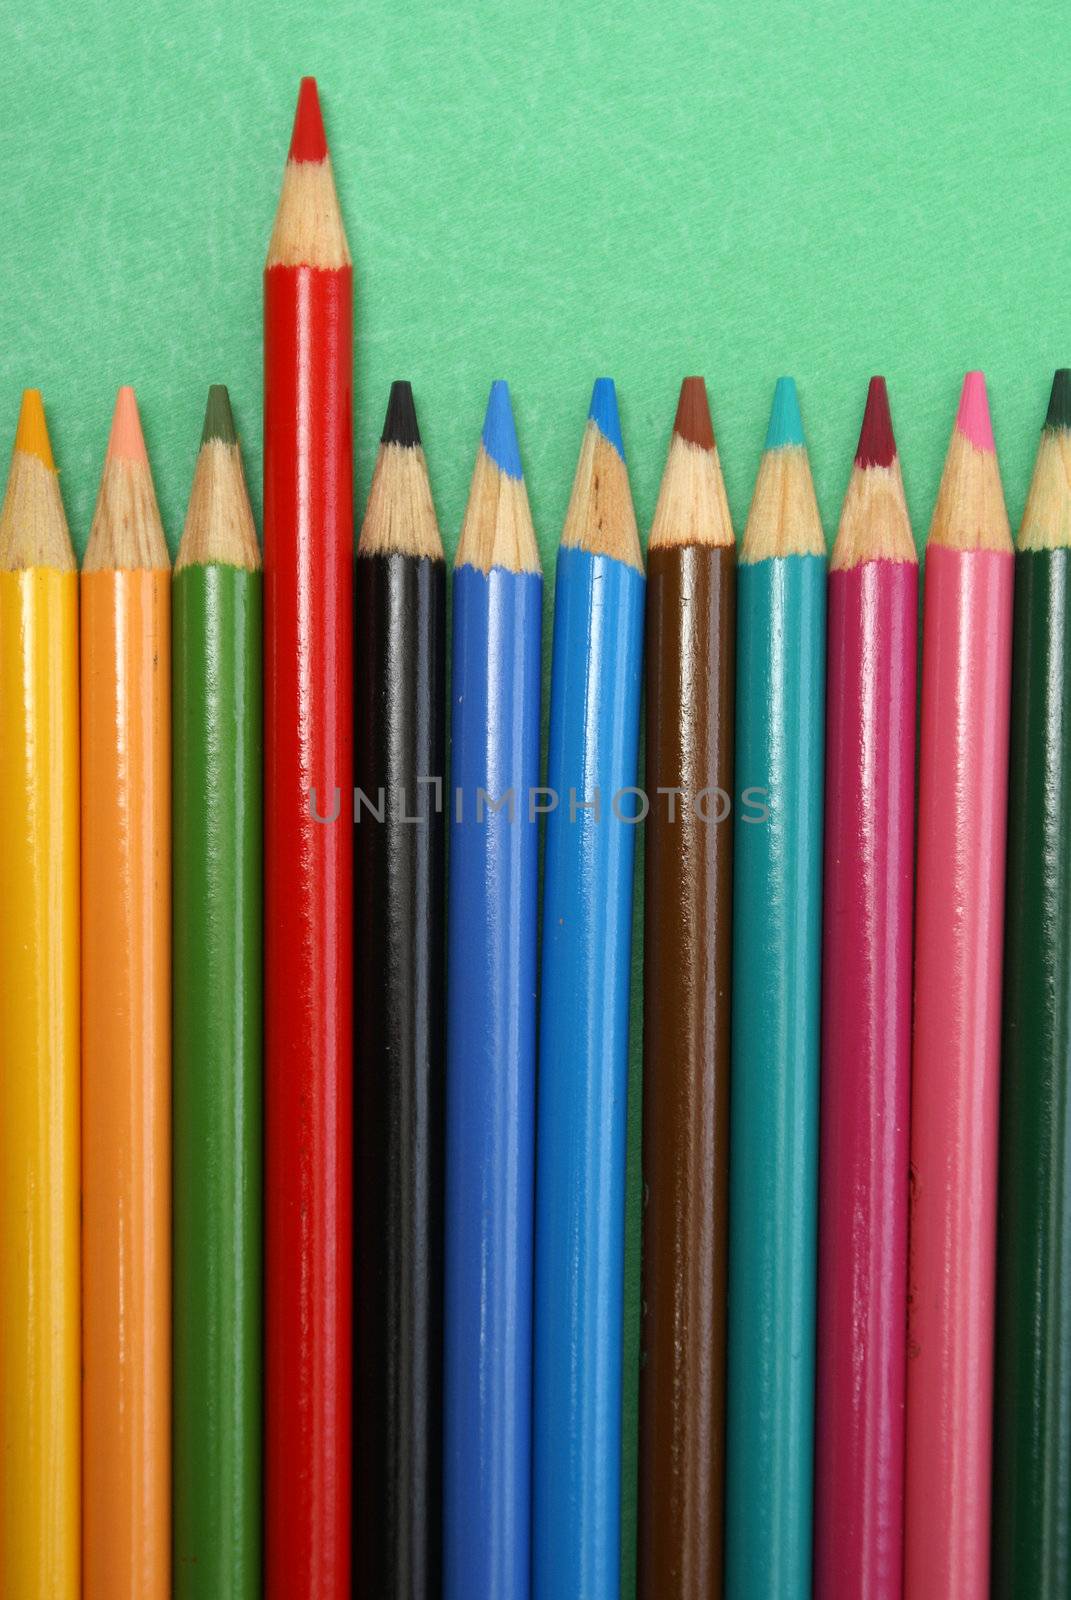 A row of pencil crayons with a red one standing out from the crowd.